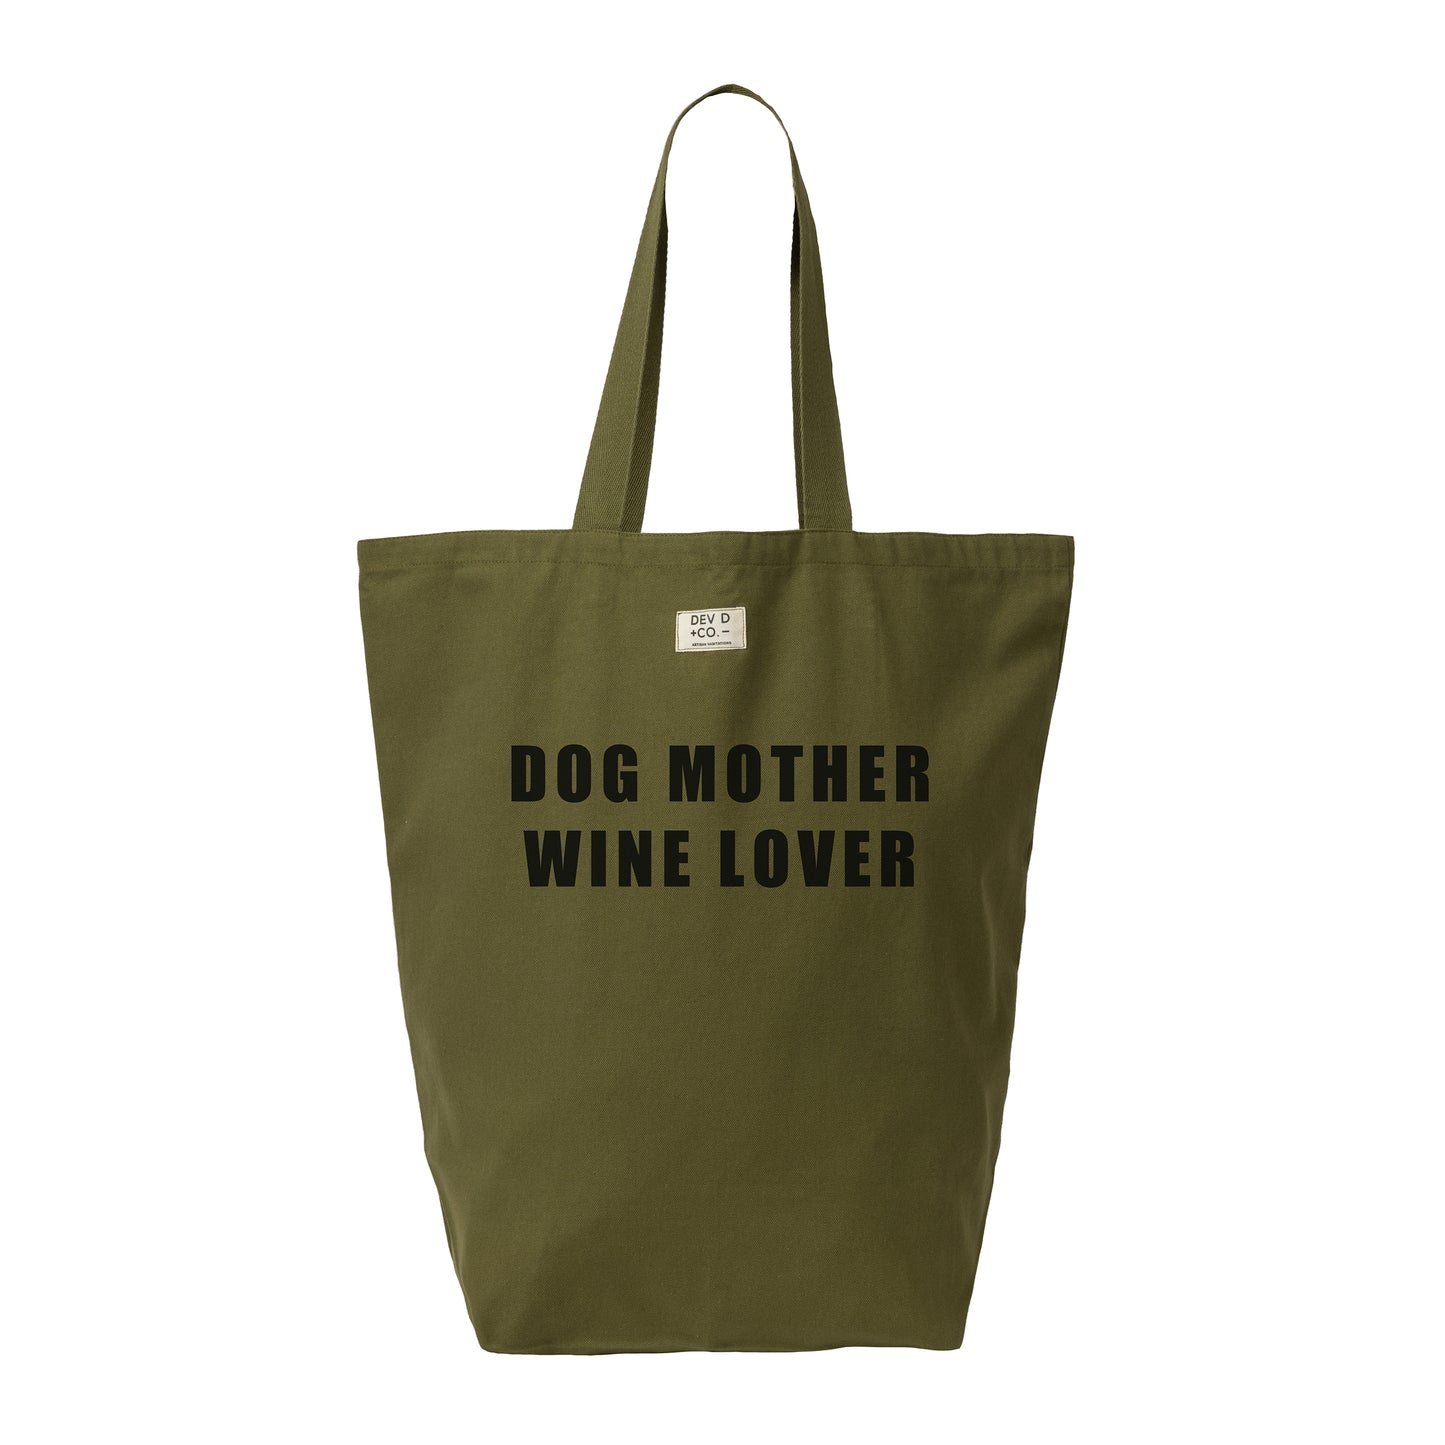 Dog Mother Wine Lover - Canvas Tote Bag with Pocket